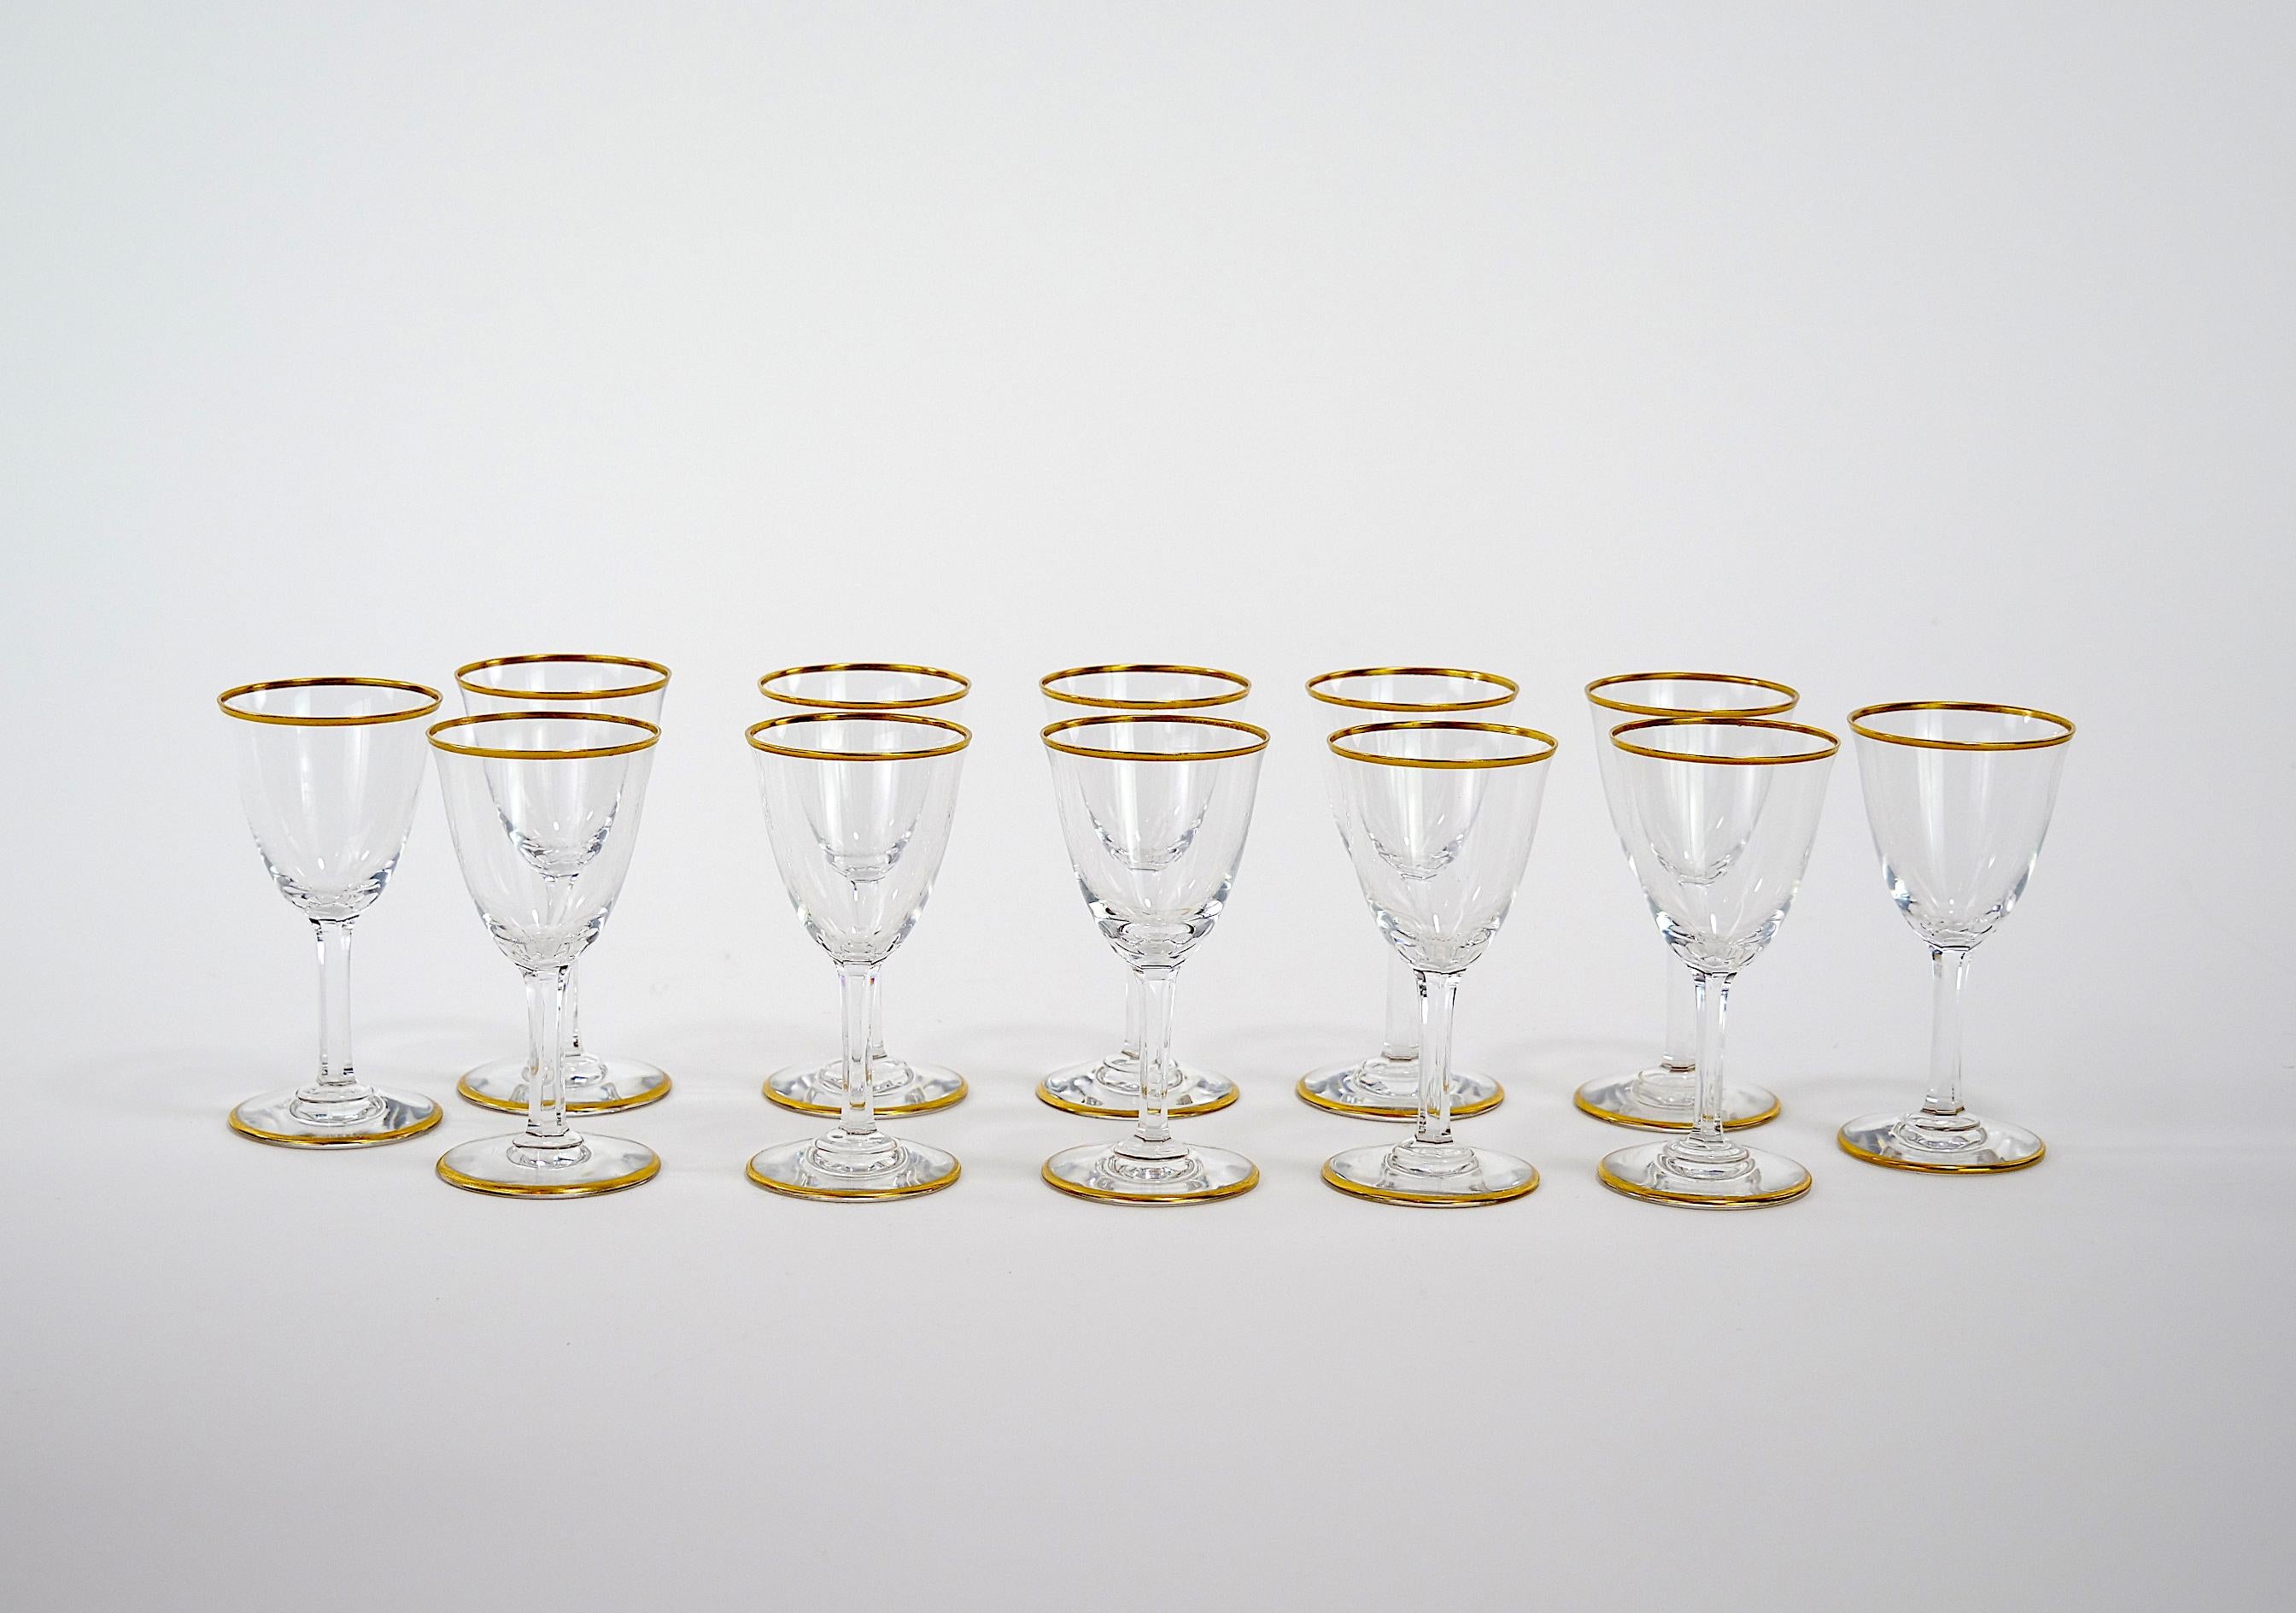 Baccarat Crystal Liquor / Sherry Glassware Service / 12 People For Sale 3